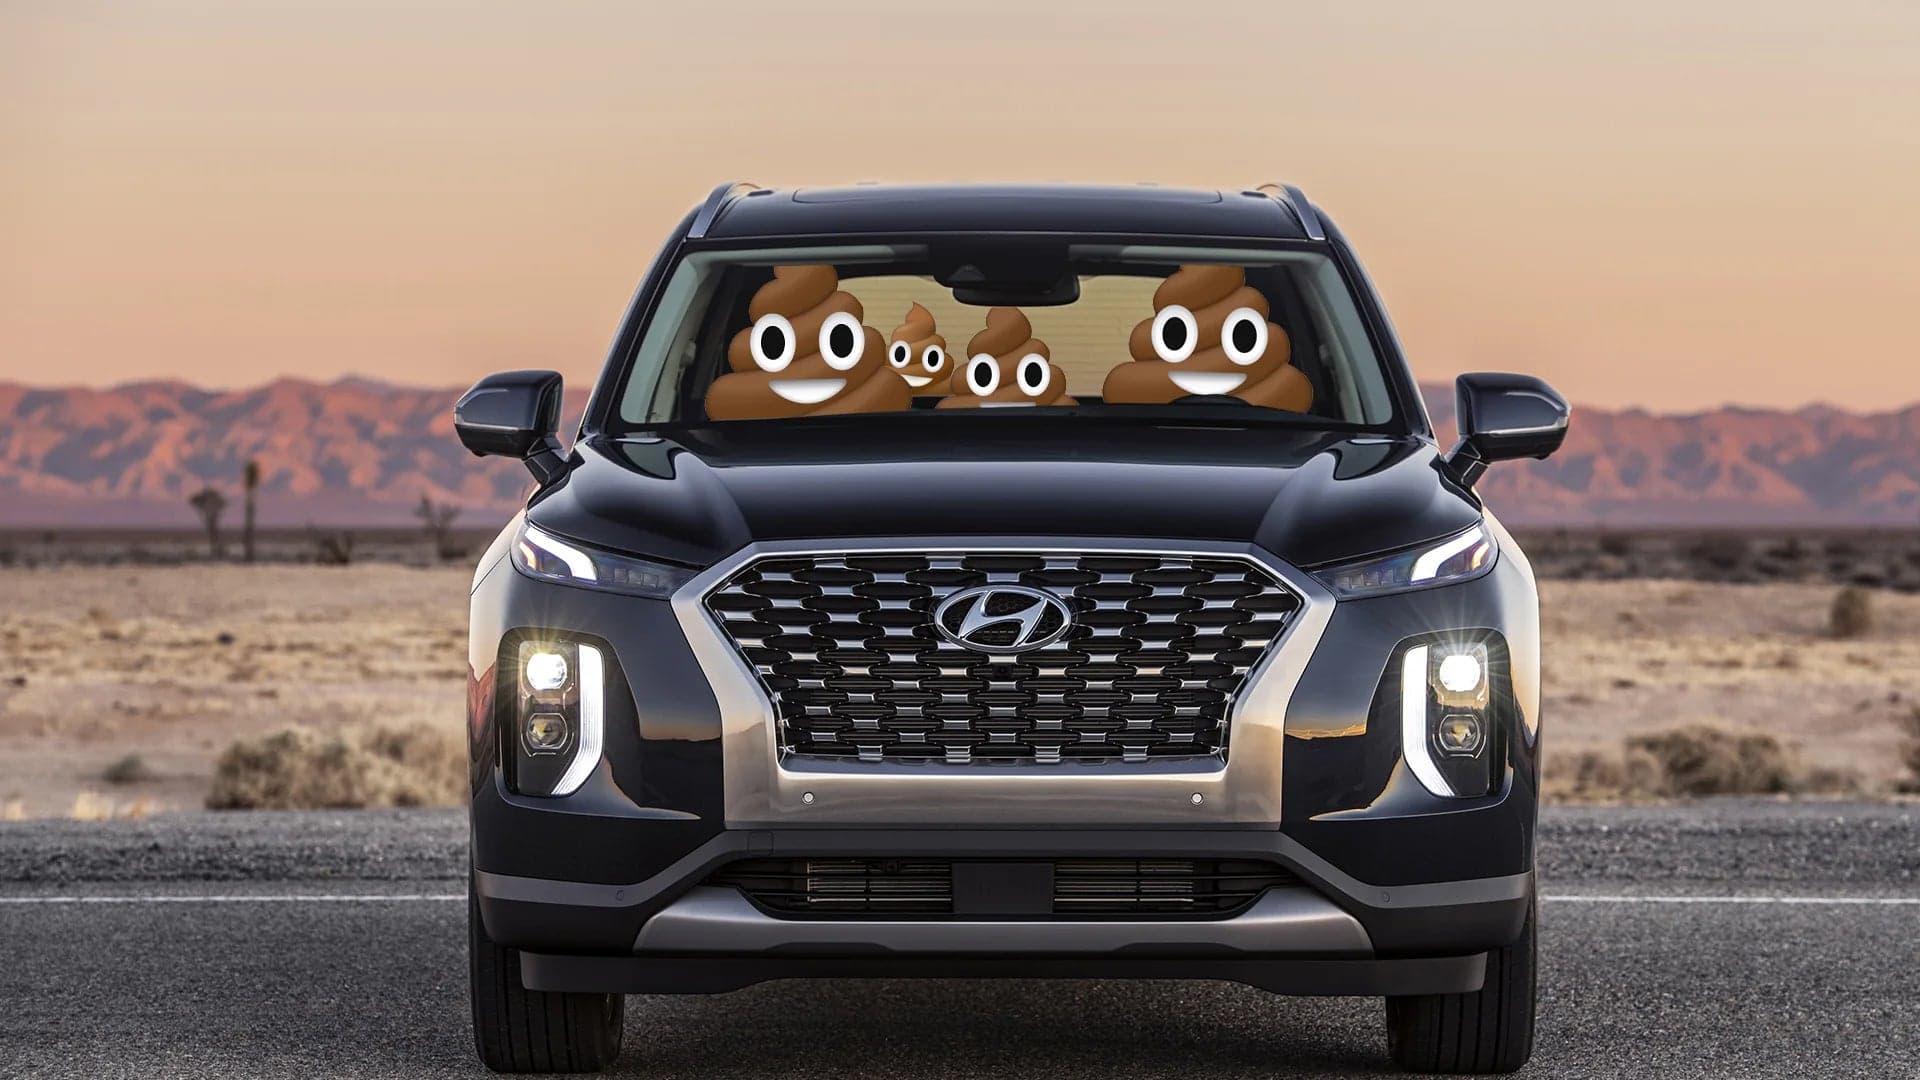 Hyundai Palisade Owner With Stinky Headrests Gets Their SUV Bought Back Via Lemon Law